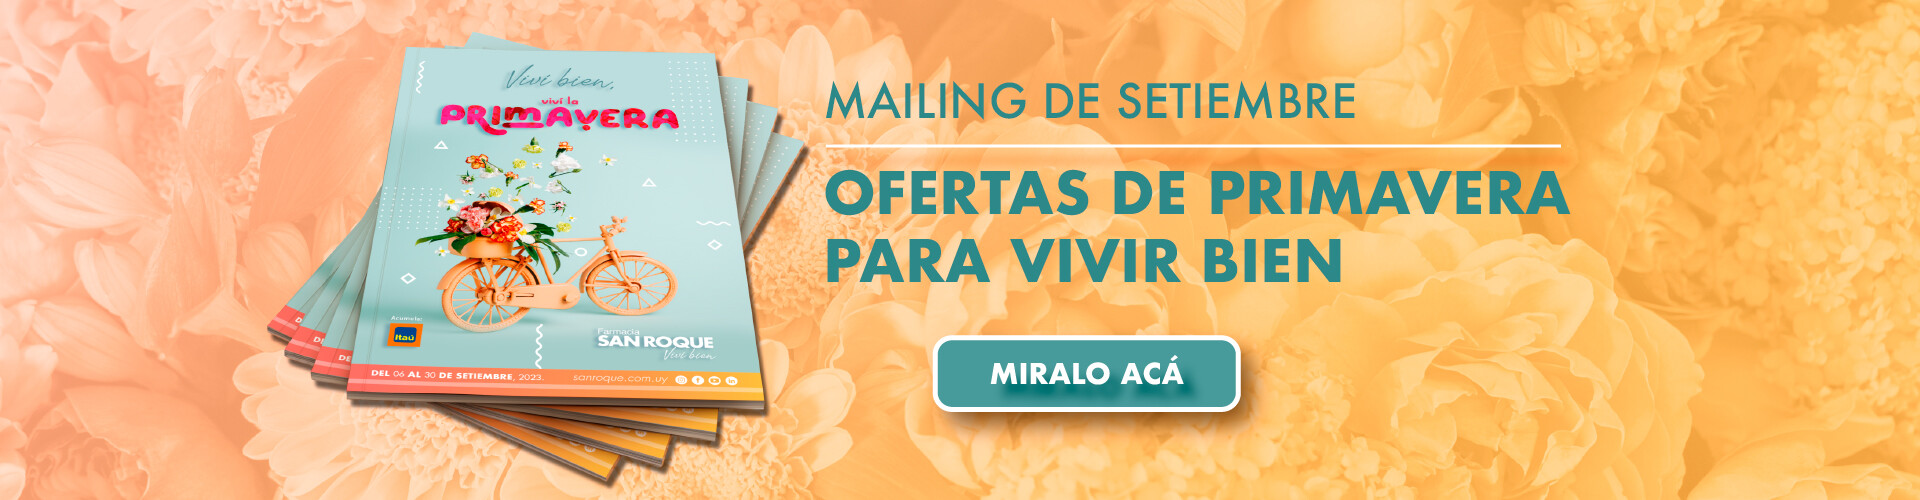 mailing septiembre